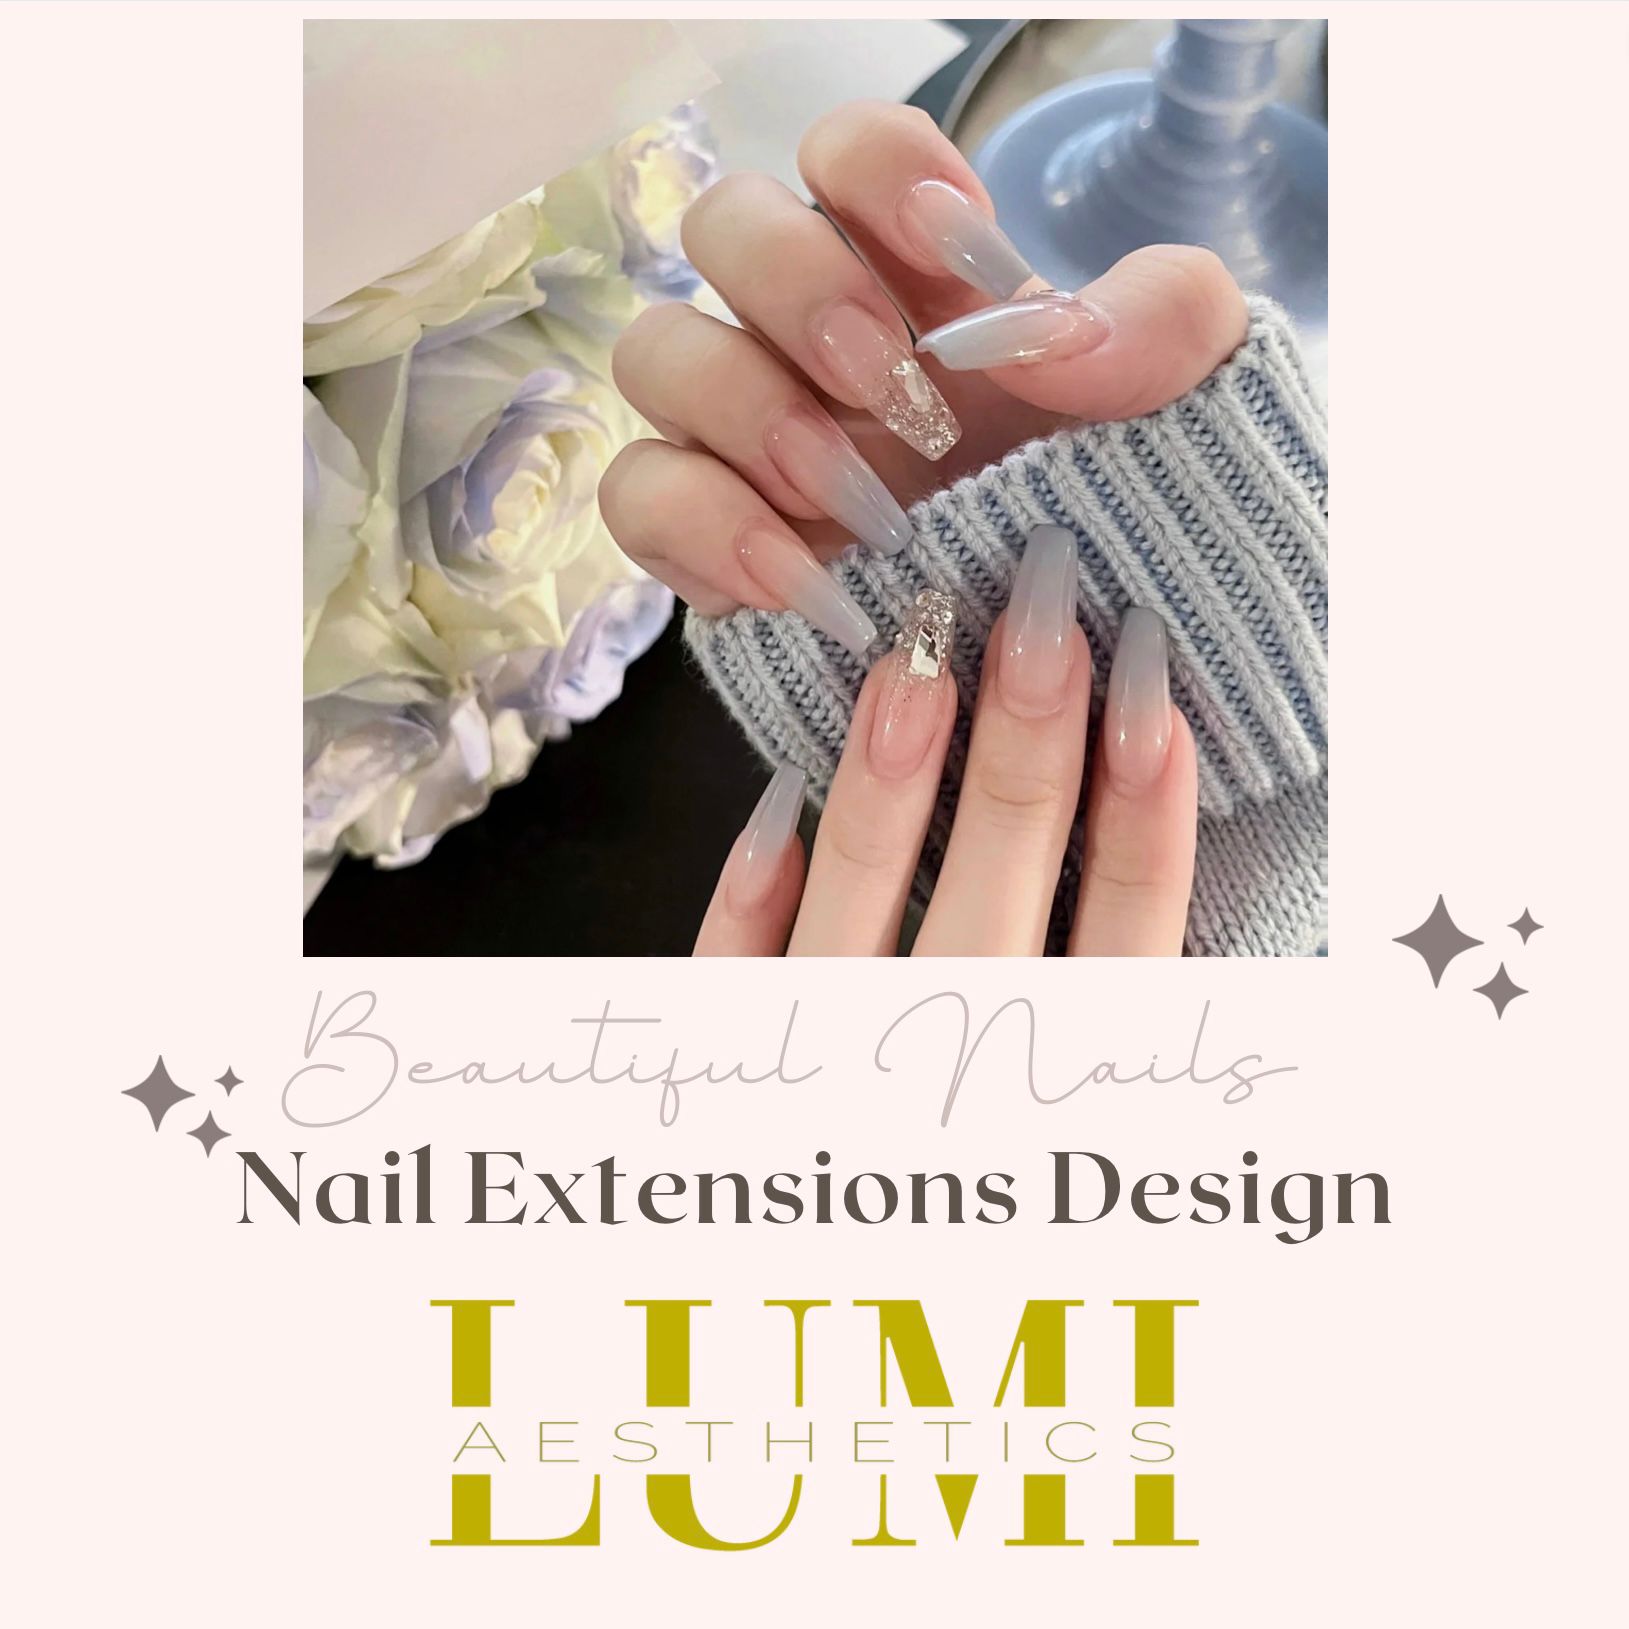 Posh - Guwahati - These beautiful nail extensions done by pompi..! |  Facebook